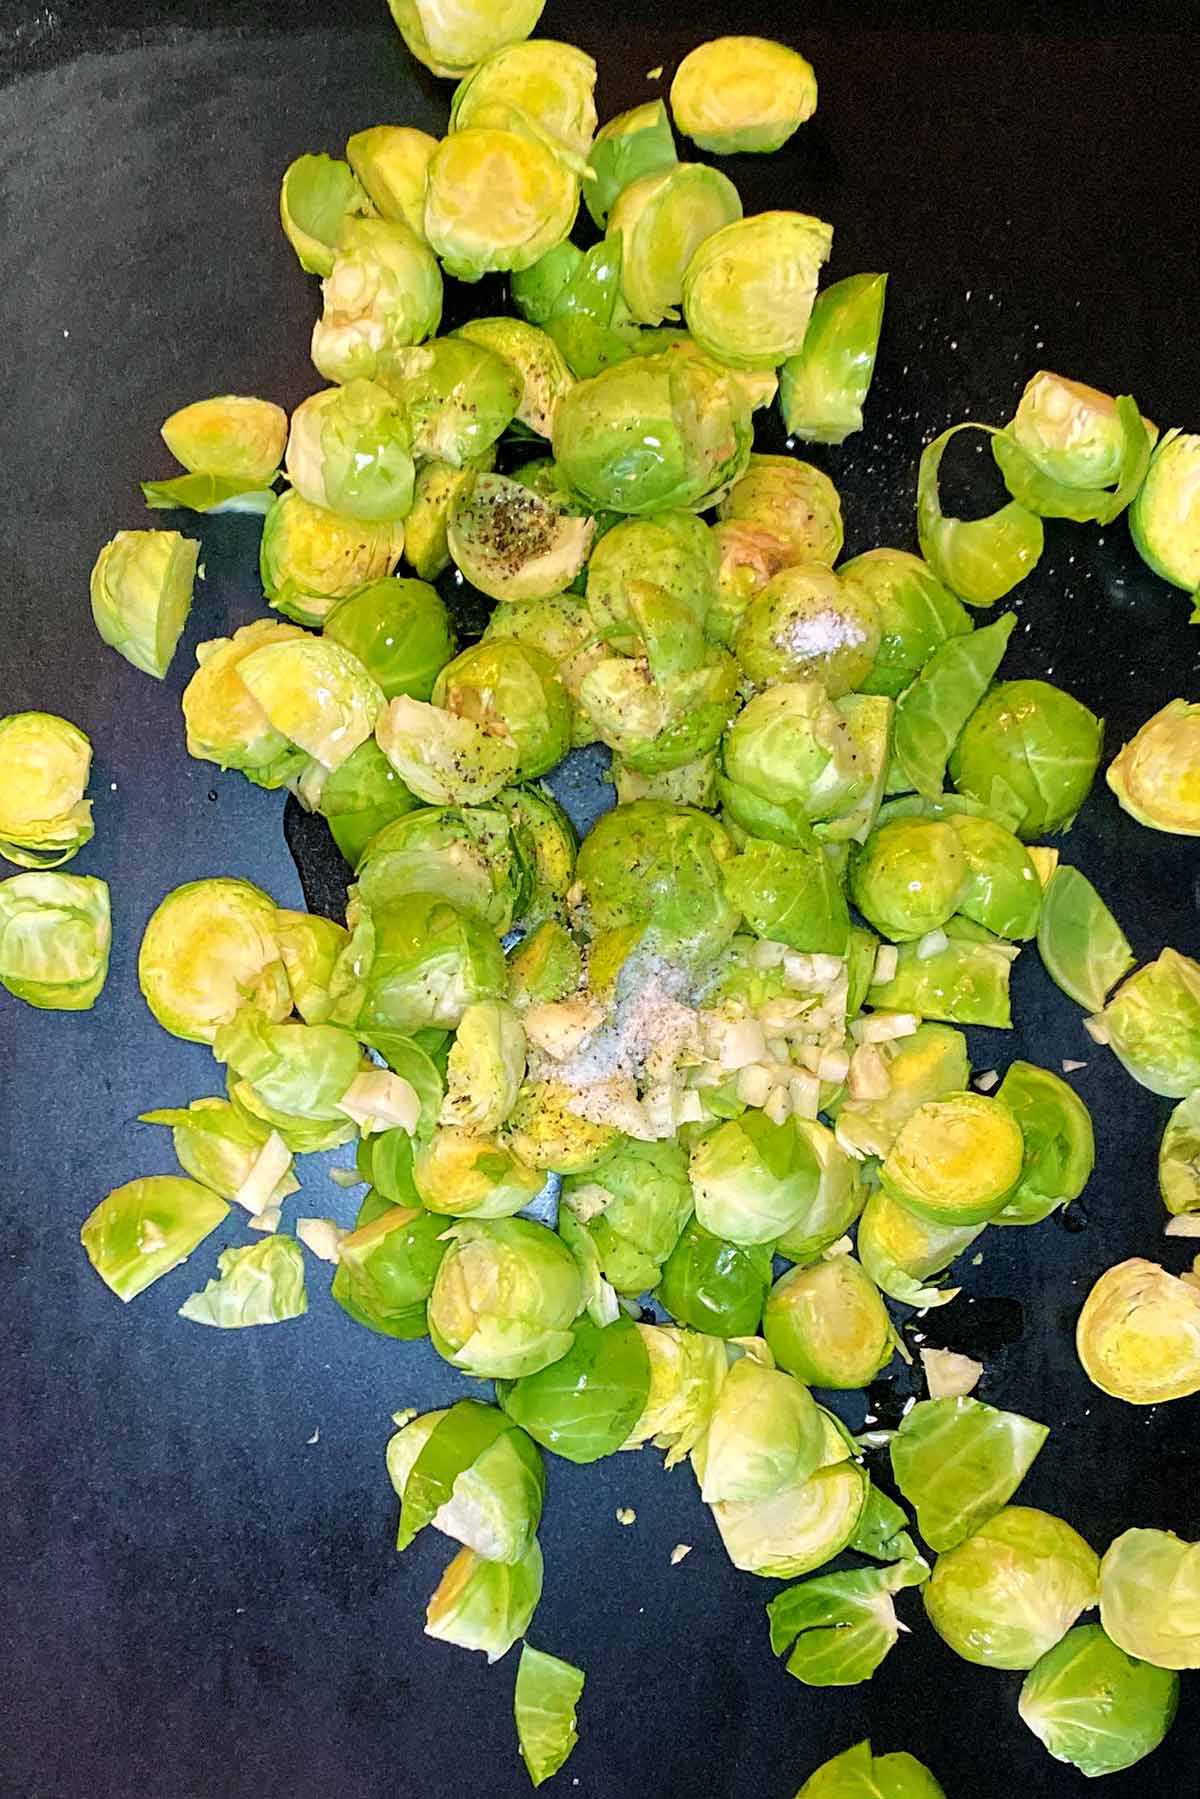 Chopped Brussels sprouts, garlic, oil, salt and pepper on a baking tray.